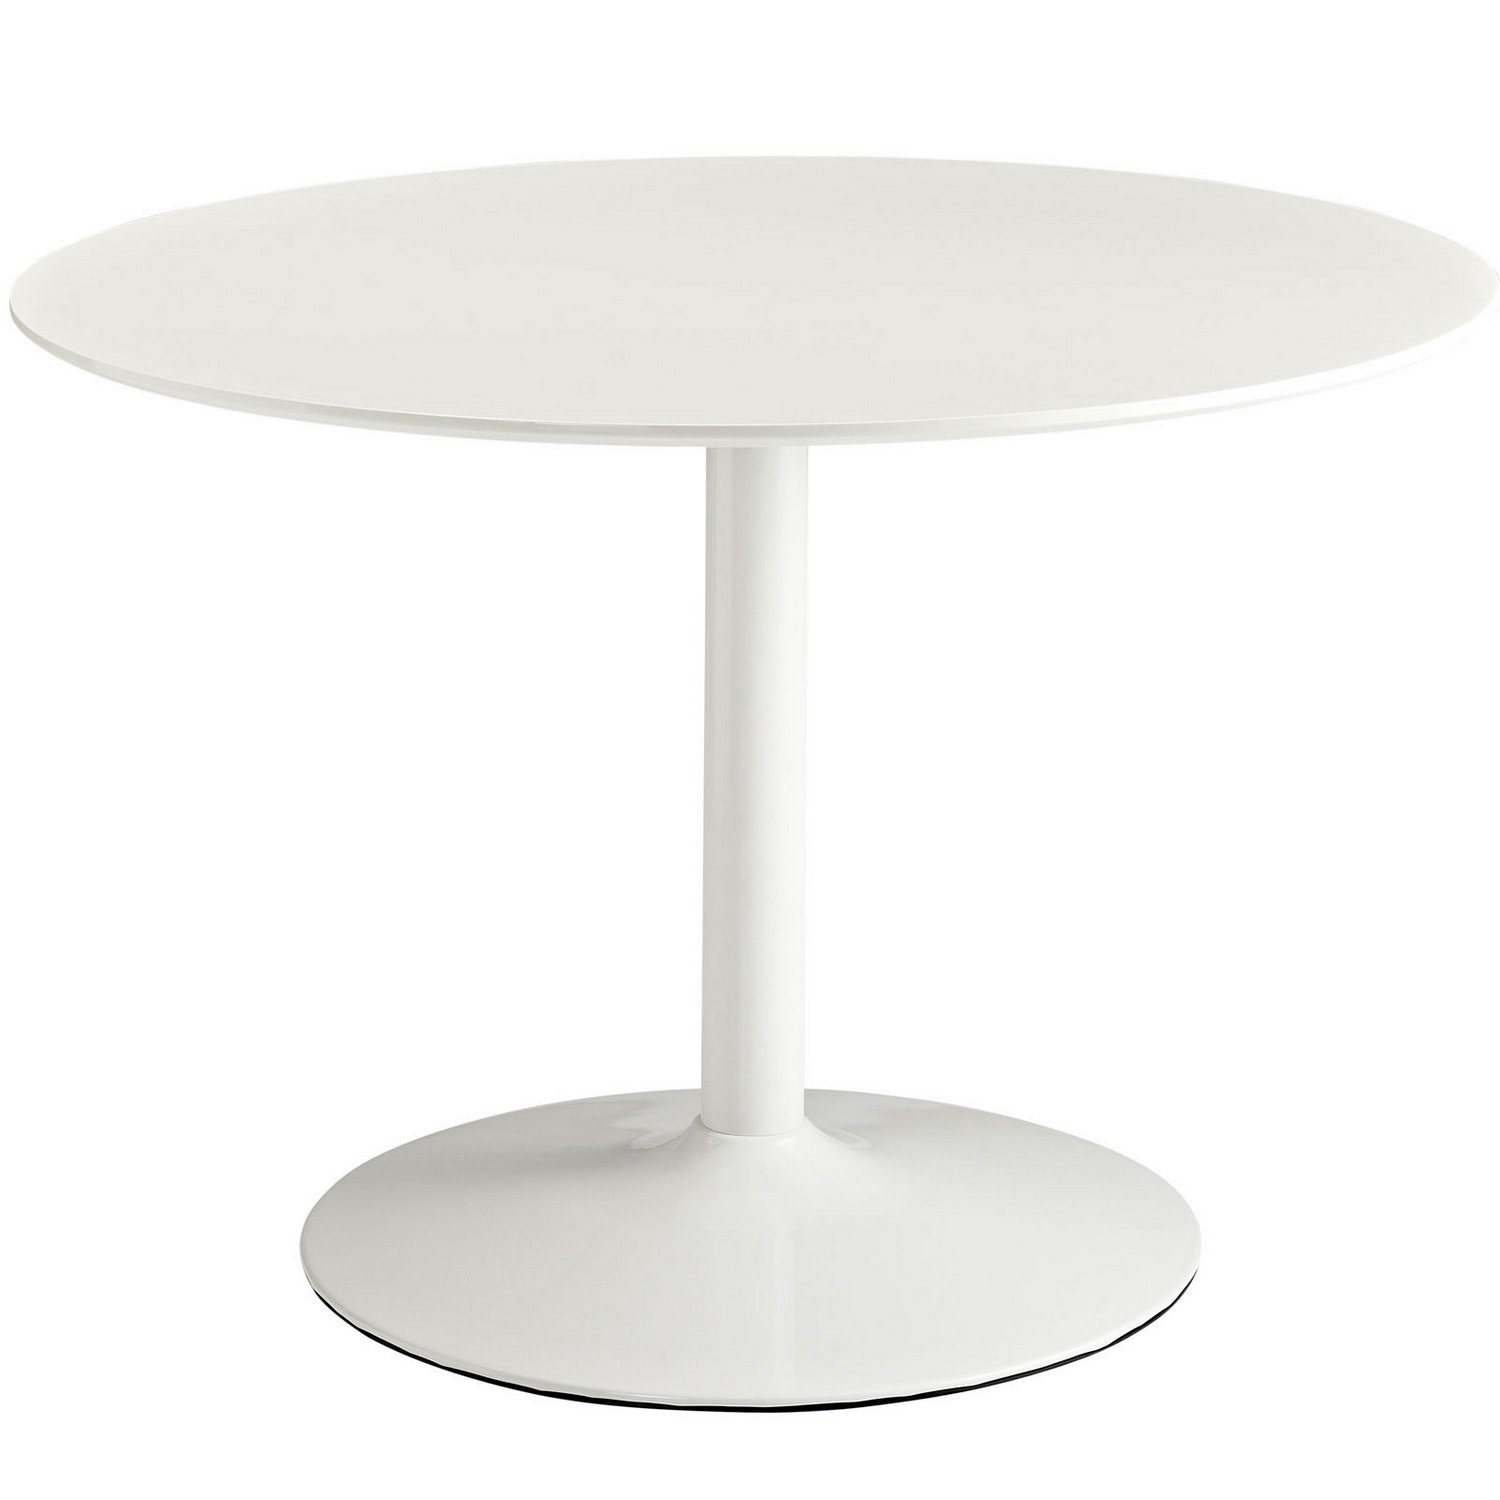 Modway Revolve Dining Table - White